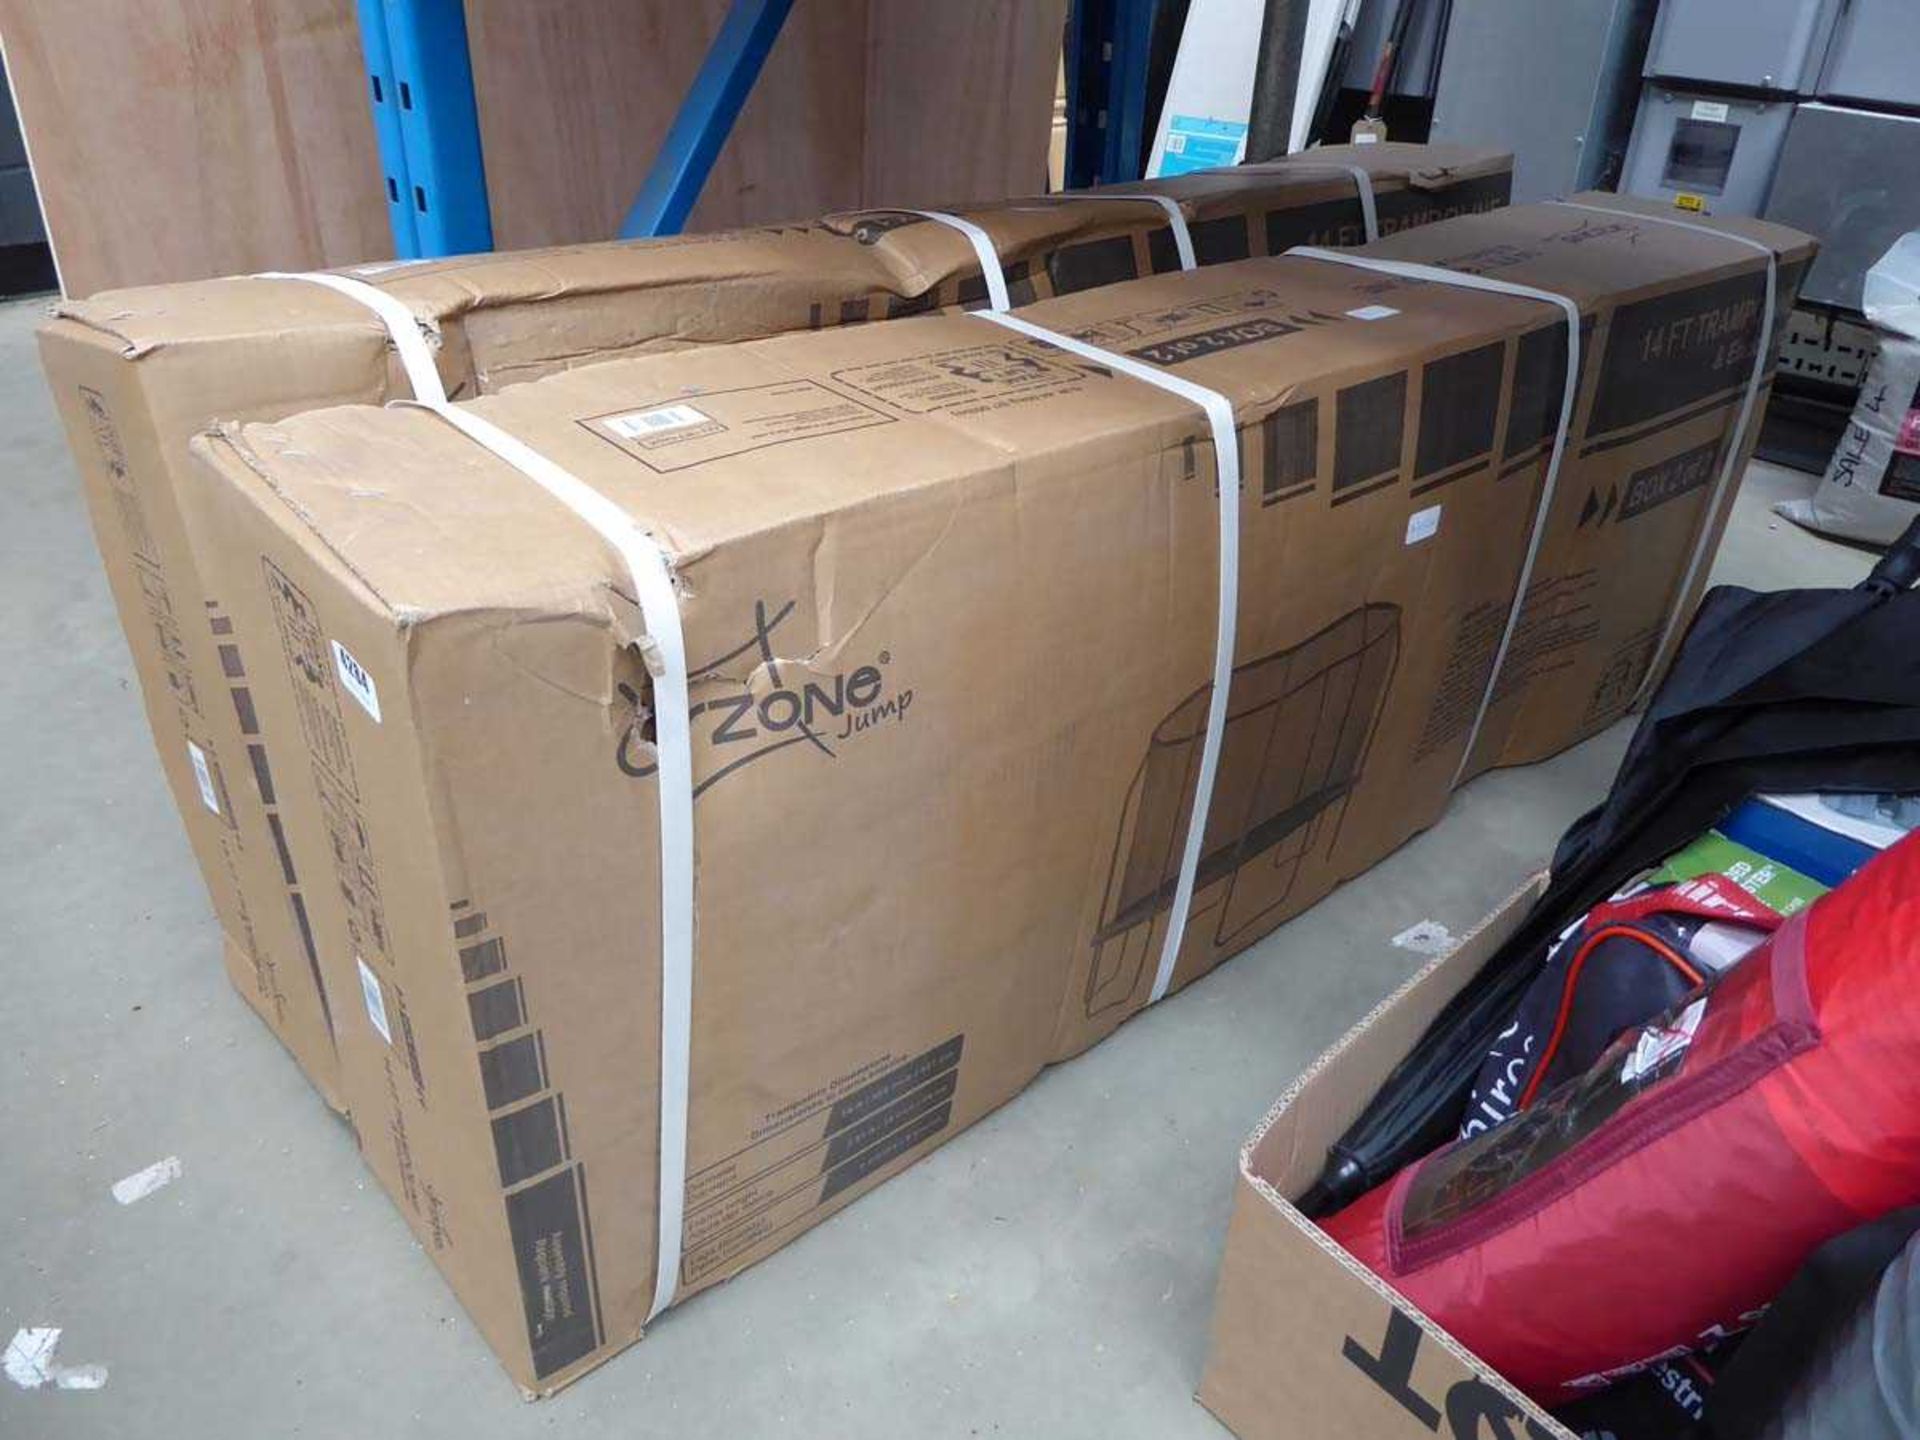 Two boxes containing trampoline parts